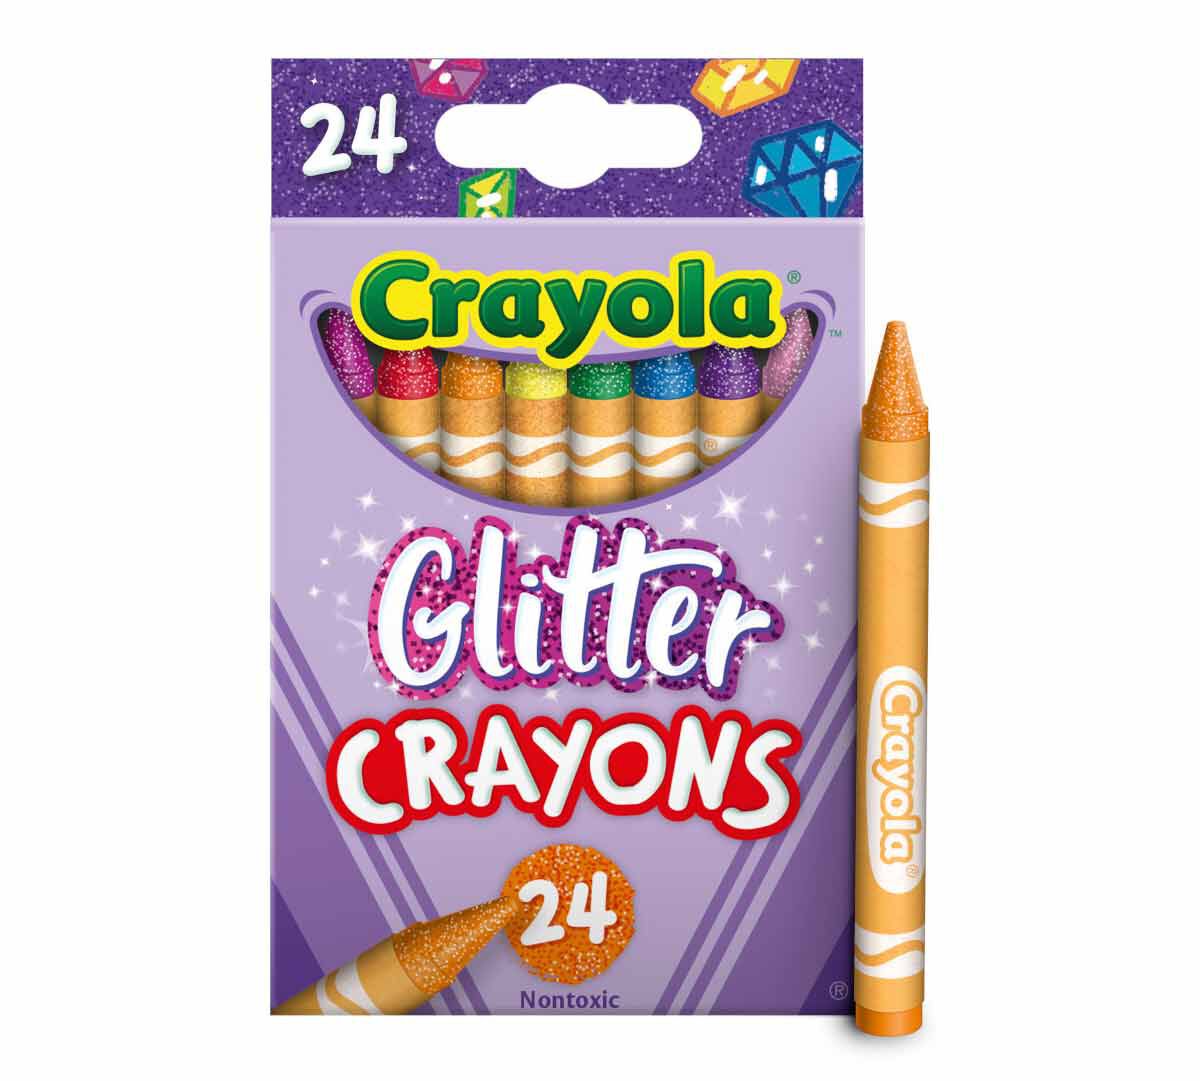 Kids Party Favors & Party Activities, Crayola.com